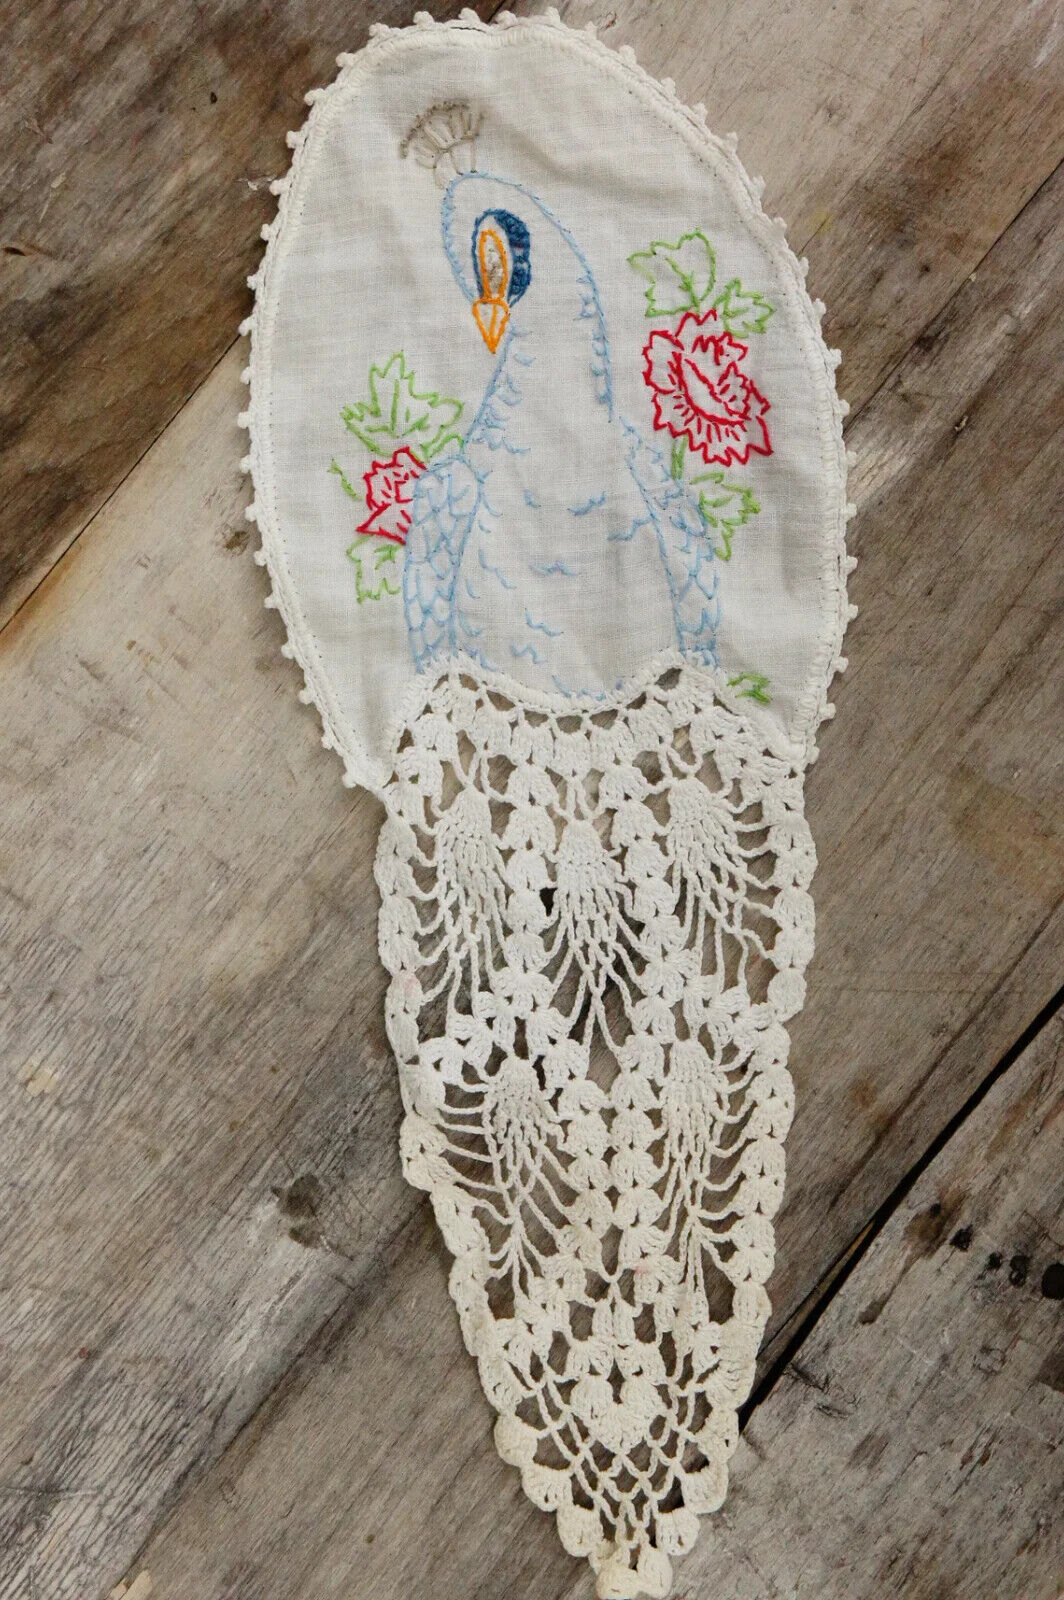 Vintage Embroidered Peacock Lace Doily Craft Supply Shabby Chic Bohemian Chic Co